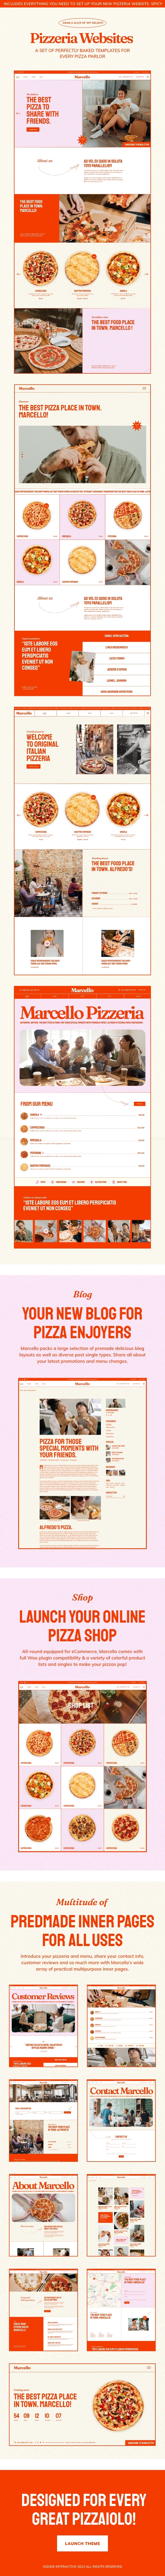 A selection of irresistible images of WordPress pages for a pizzeria restaurant.